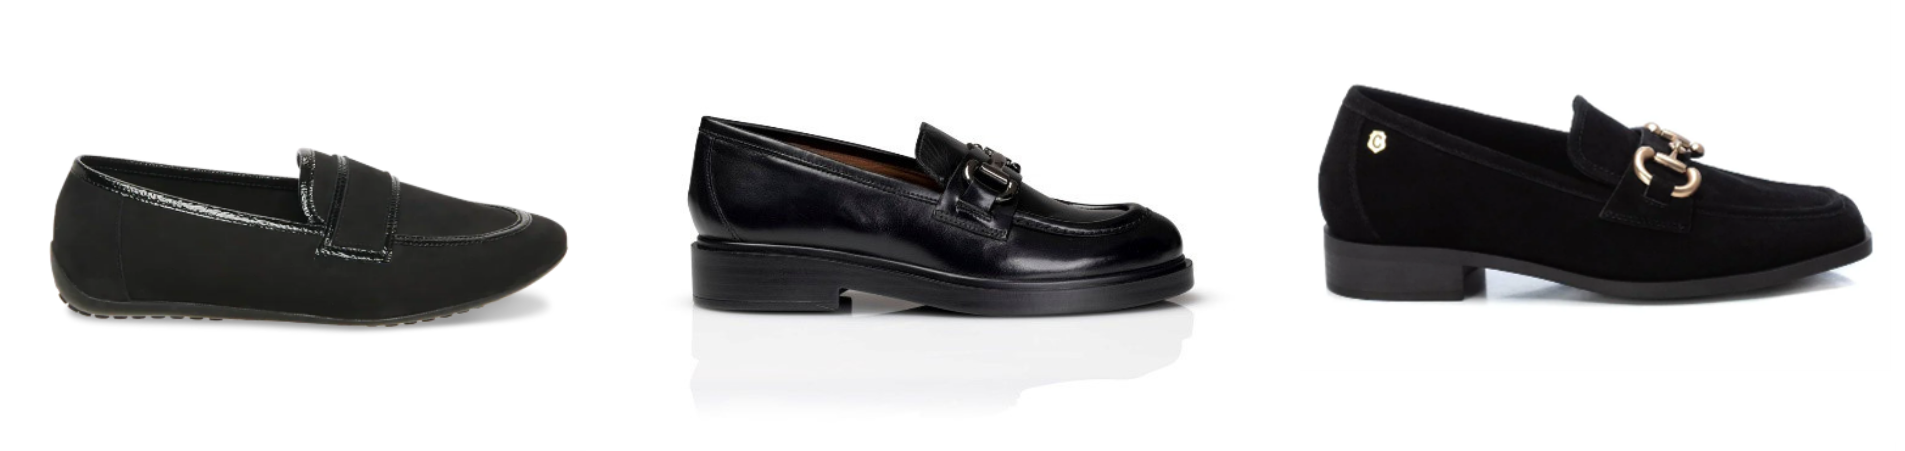 Loafers to wear with skirts and dresses at Booty Shoes